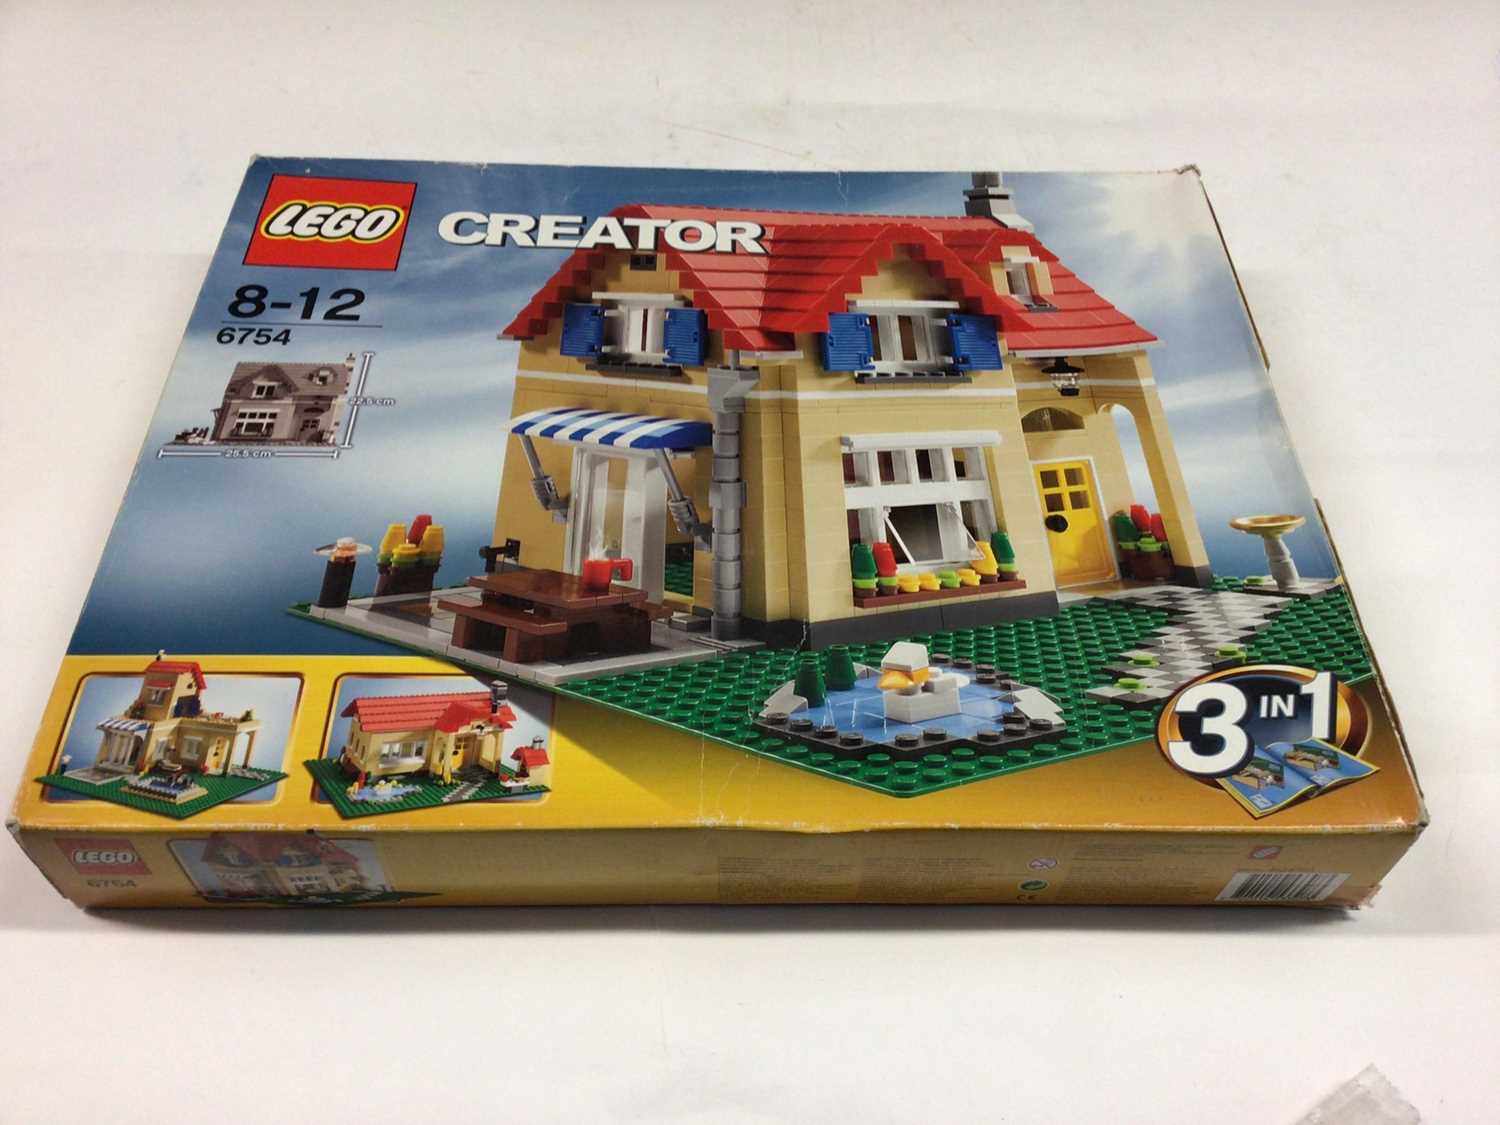 Lot 11 Creator 6754 Family House 3 in 1, with